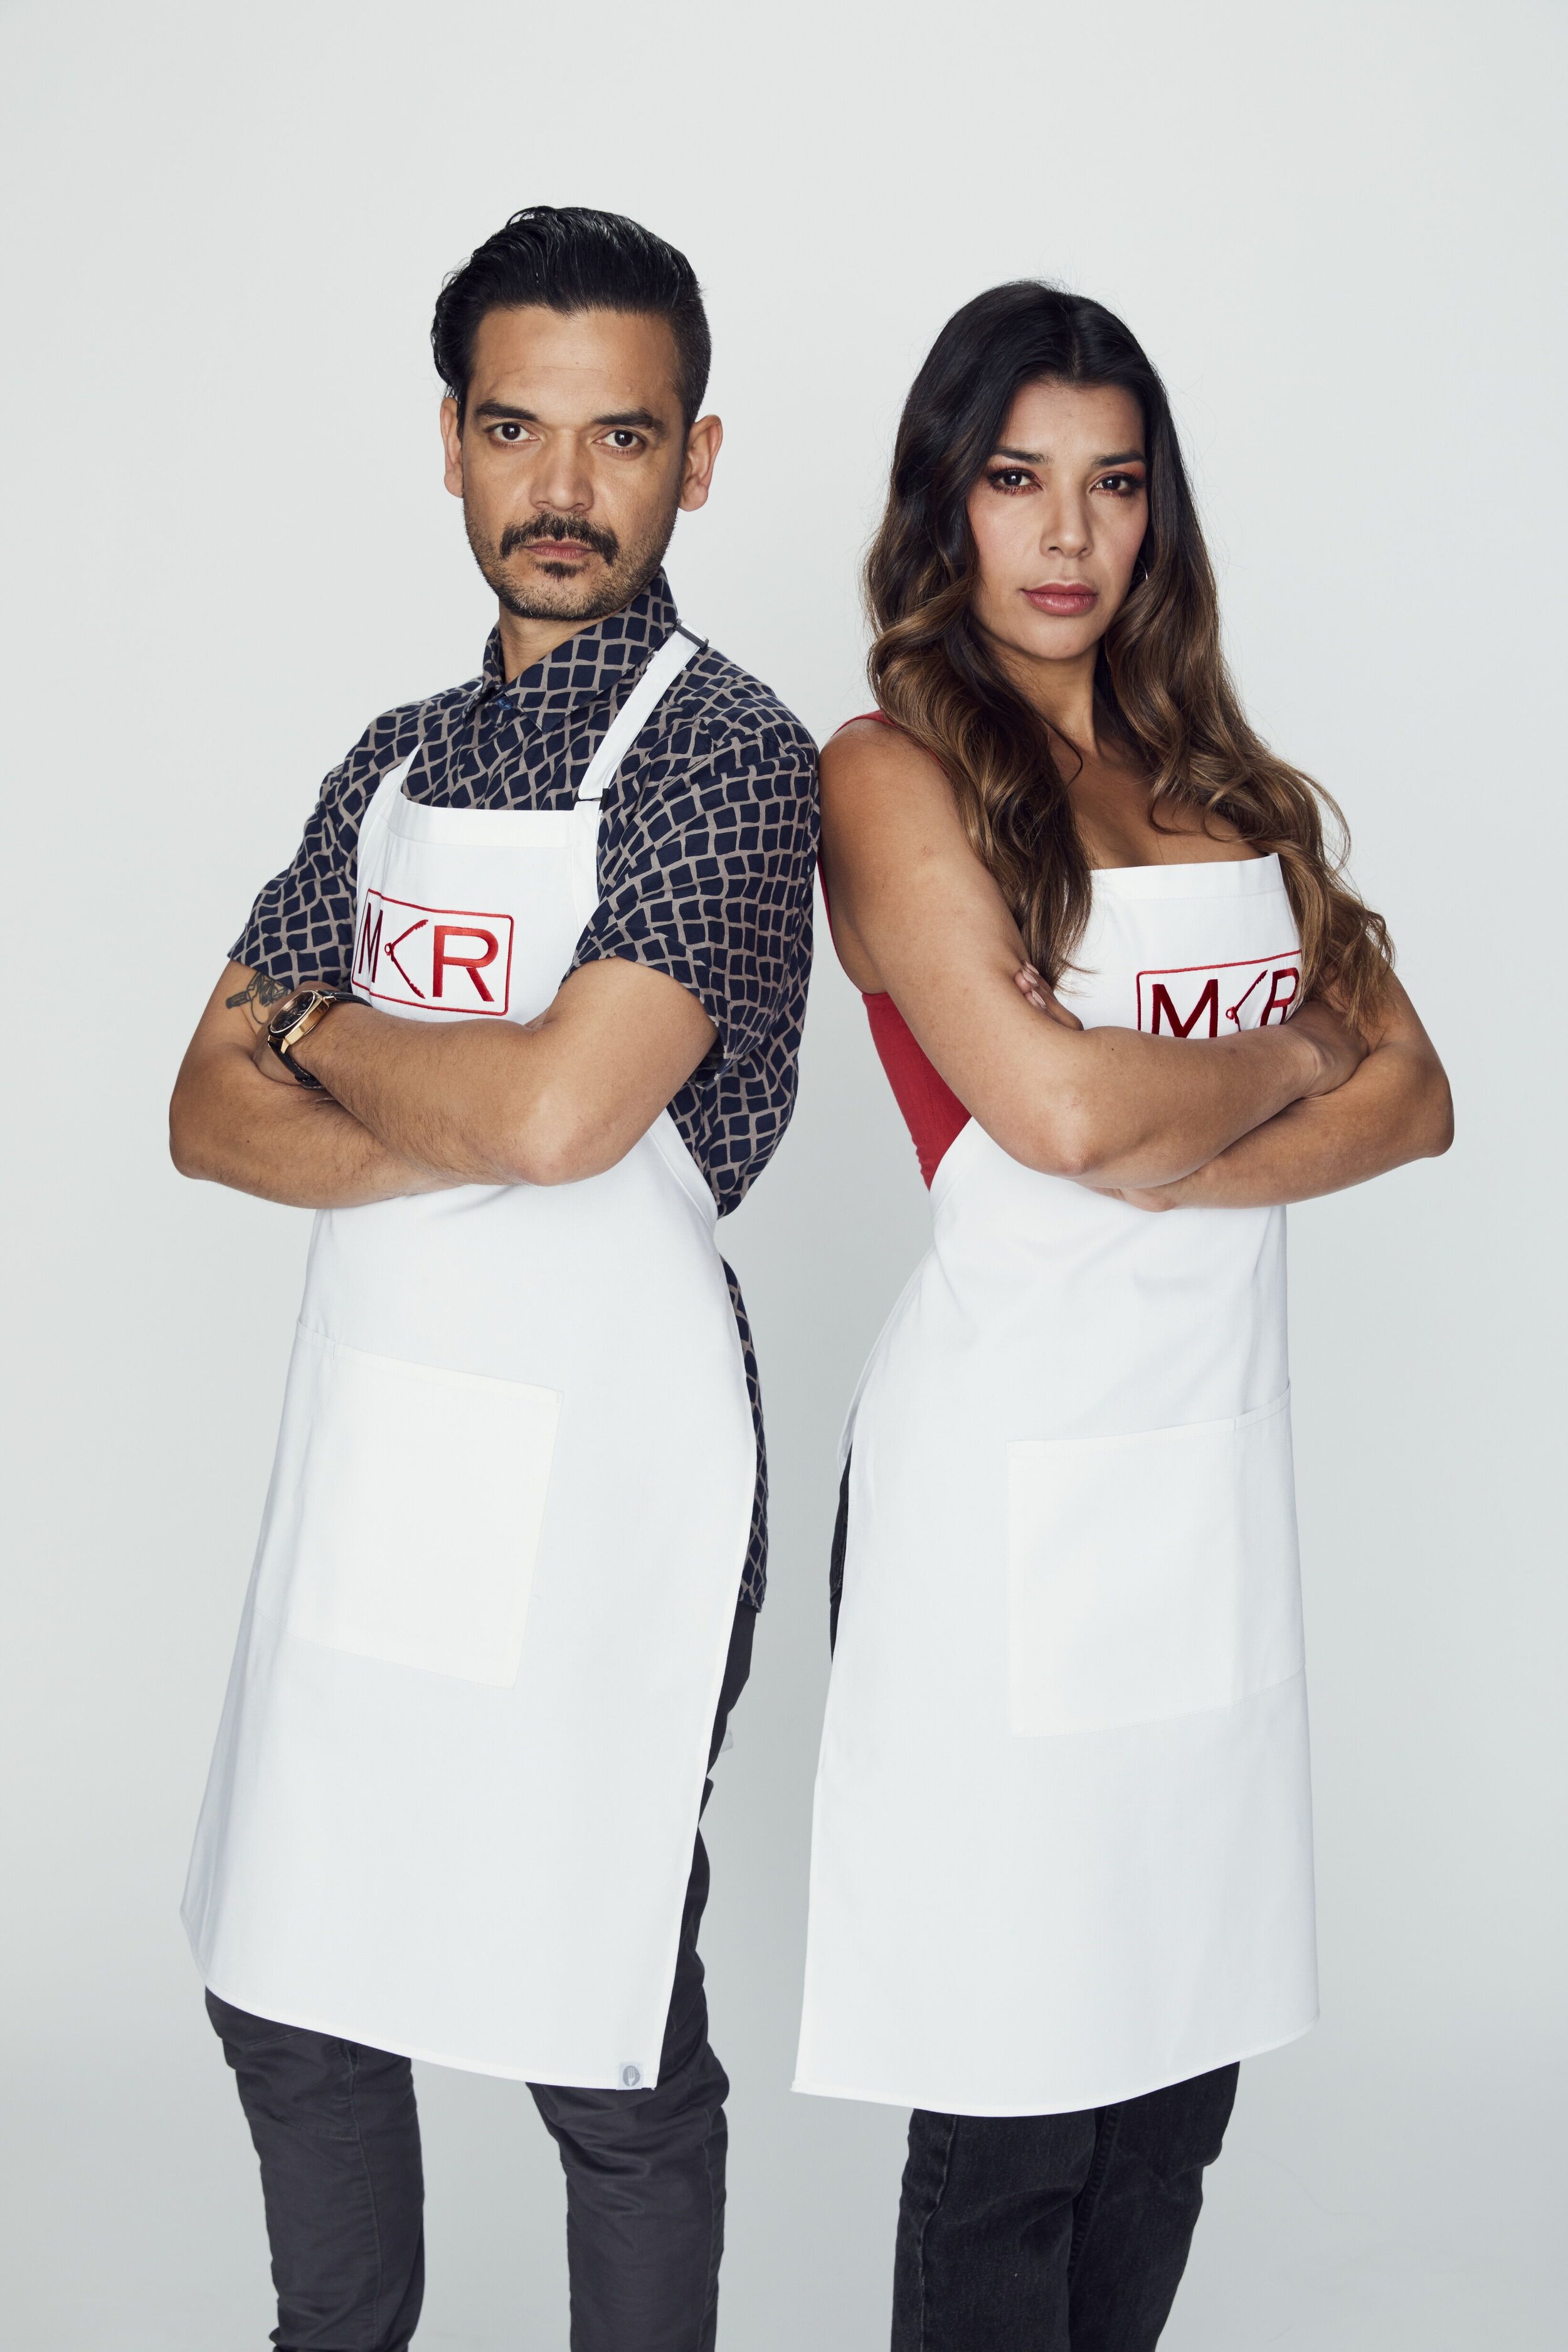   My Kitchen Rules: The Rivals  Source: Seven Network 